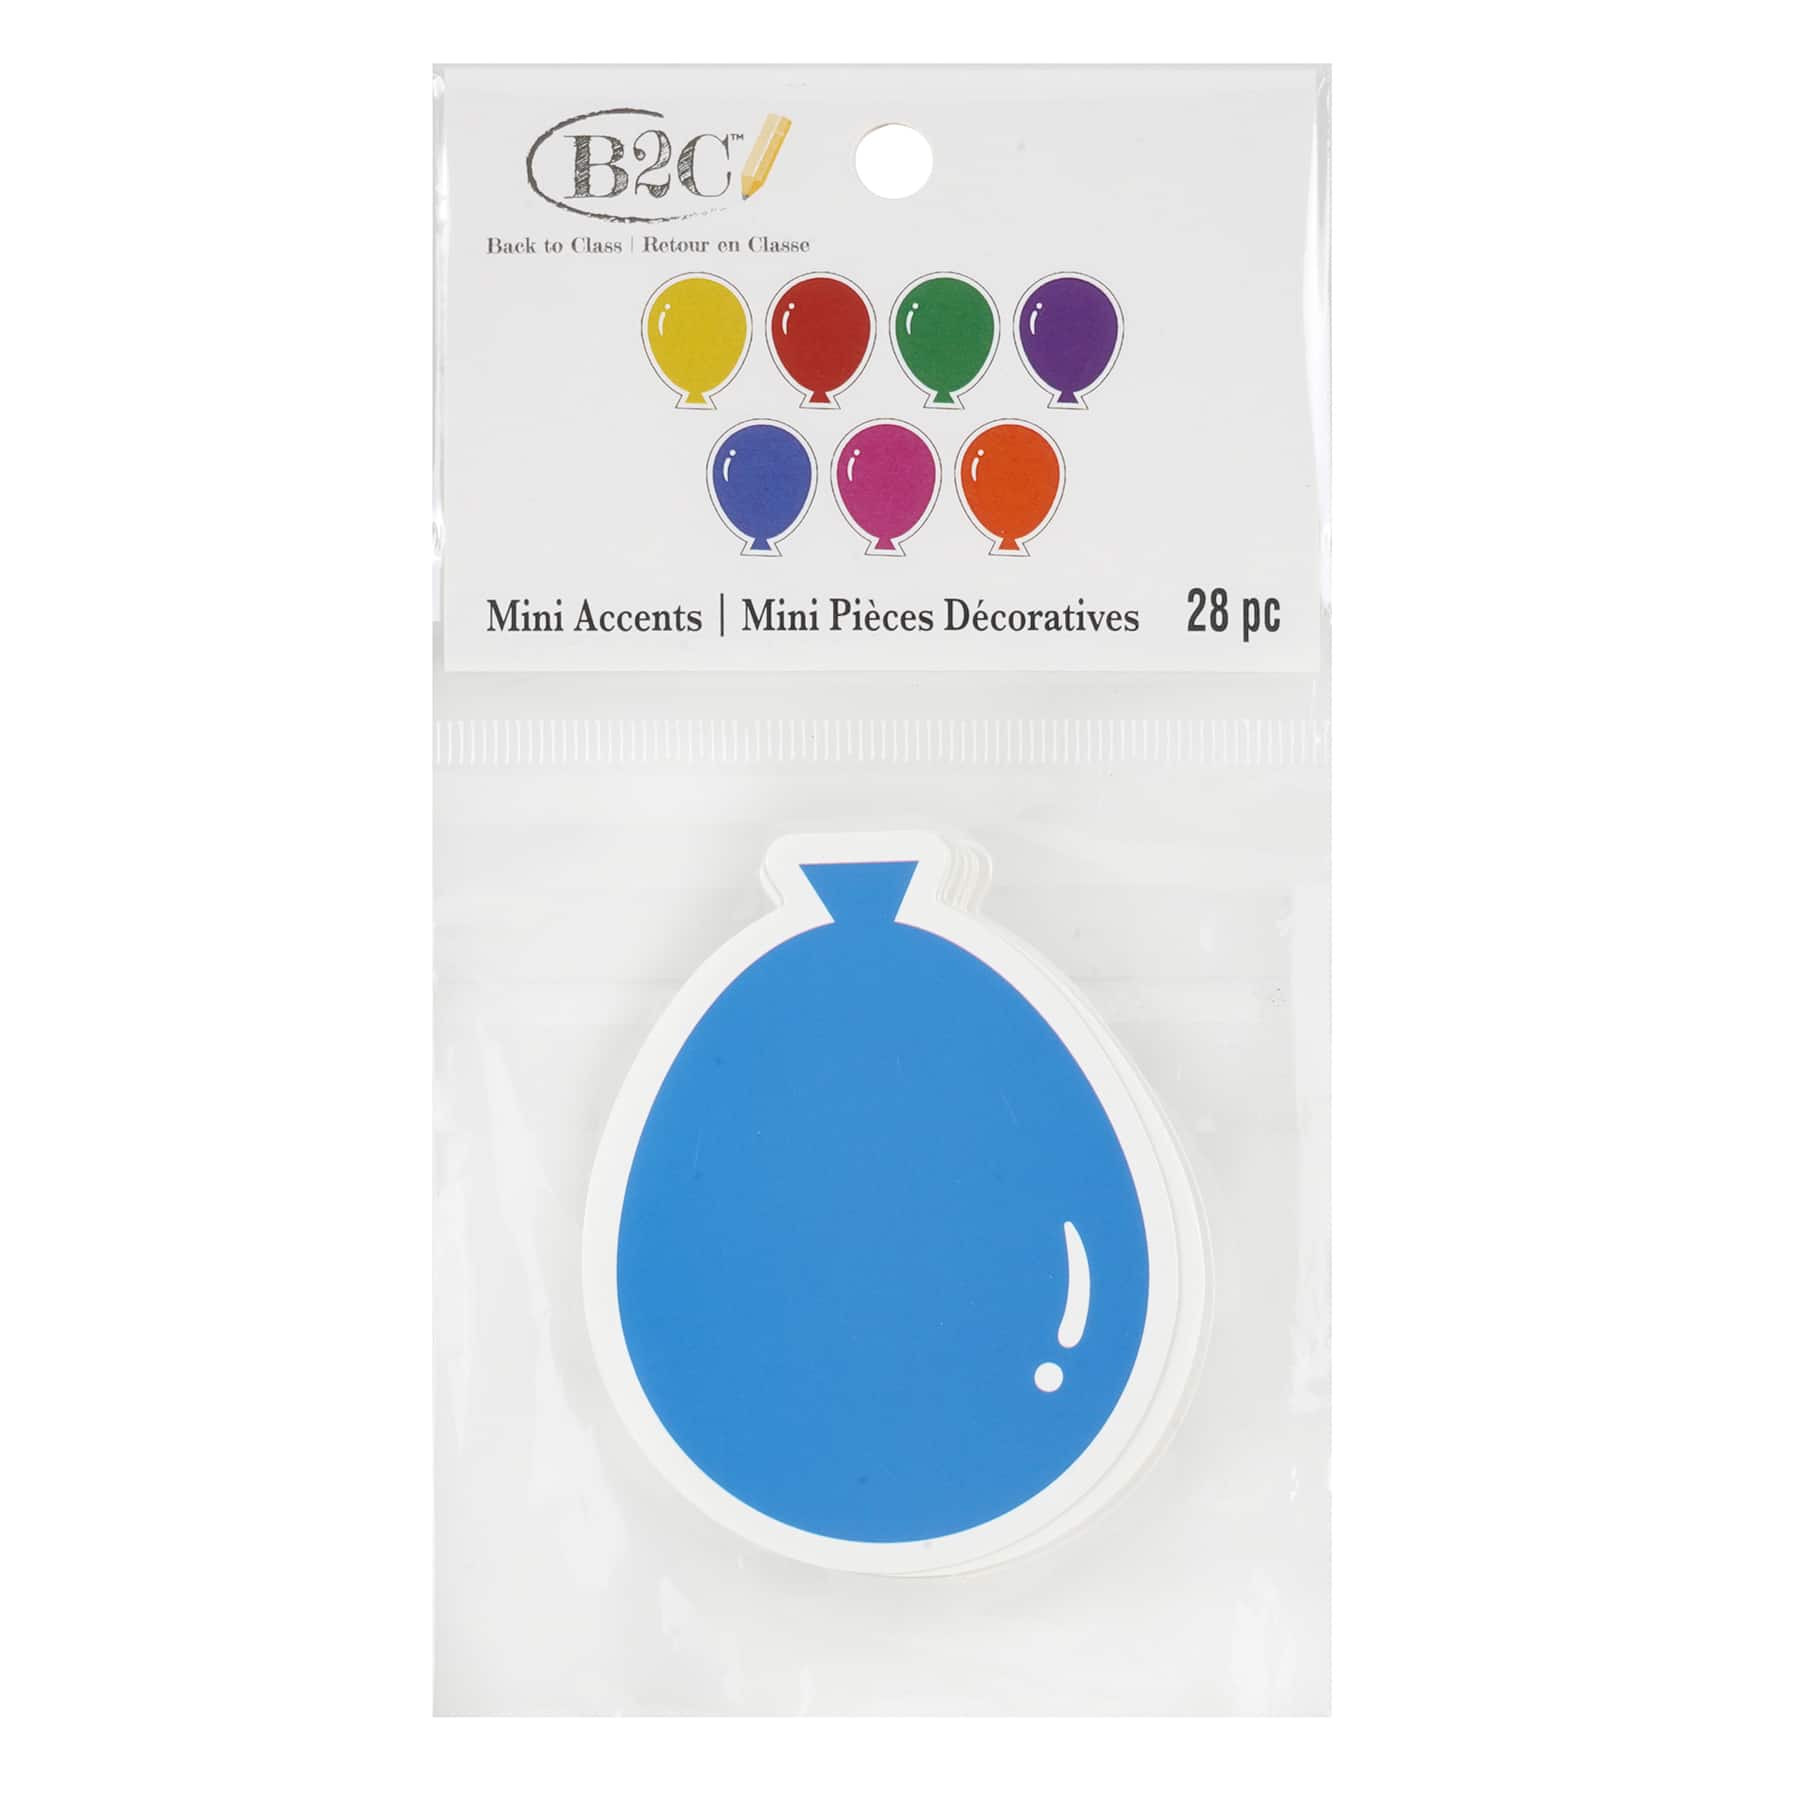 Back to Class Mini Die Cut Balloon Accents